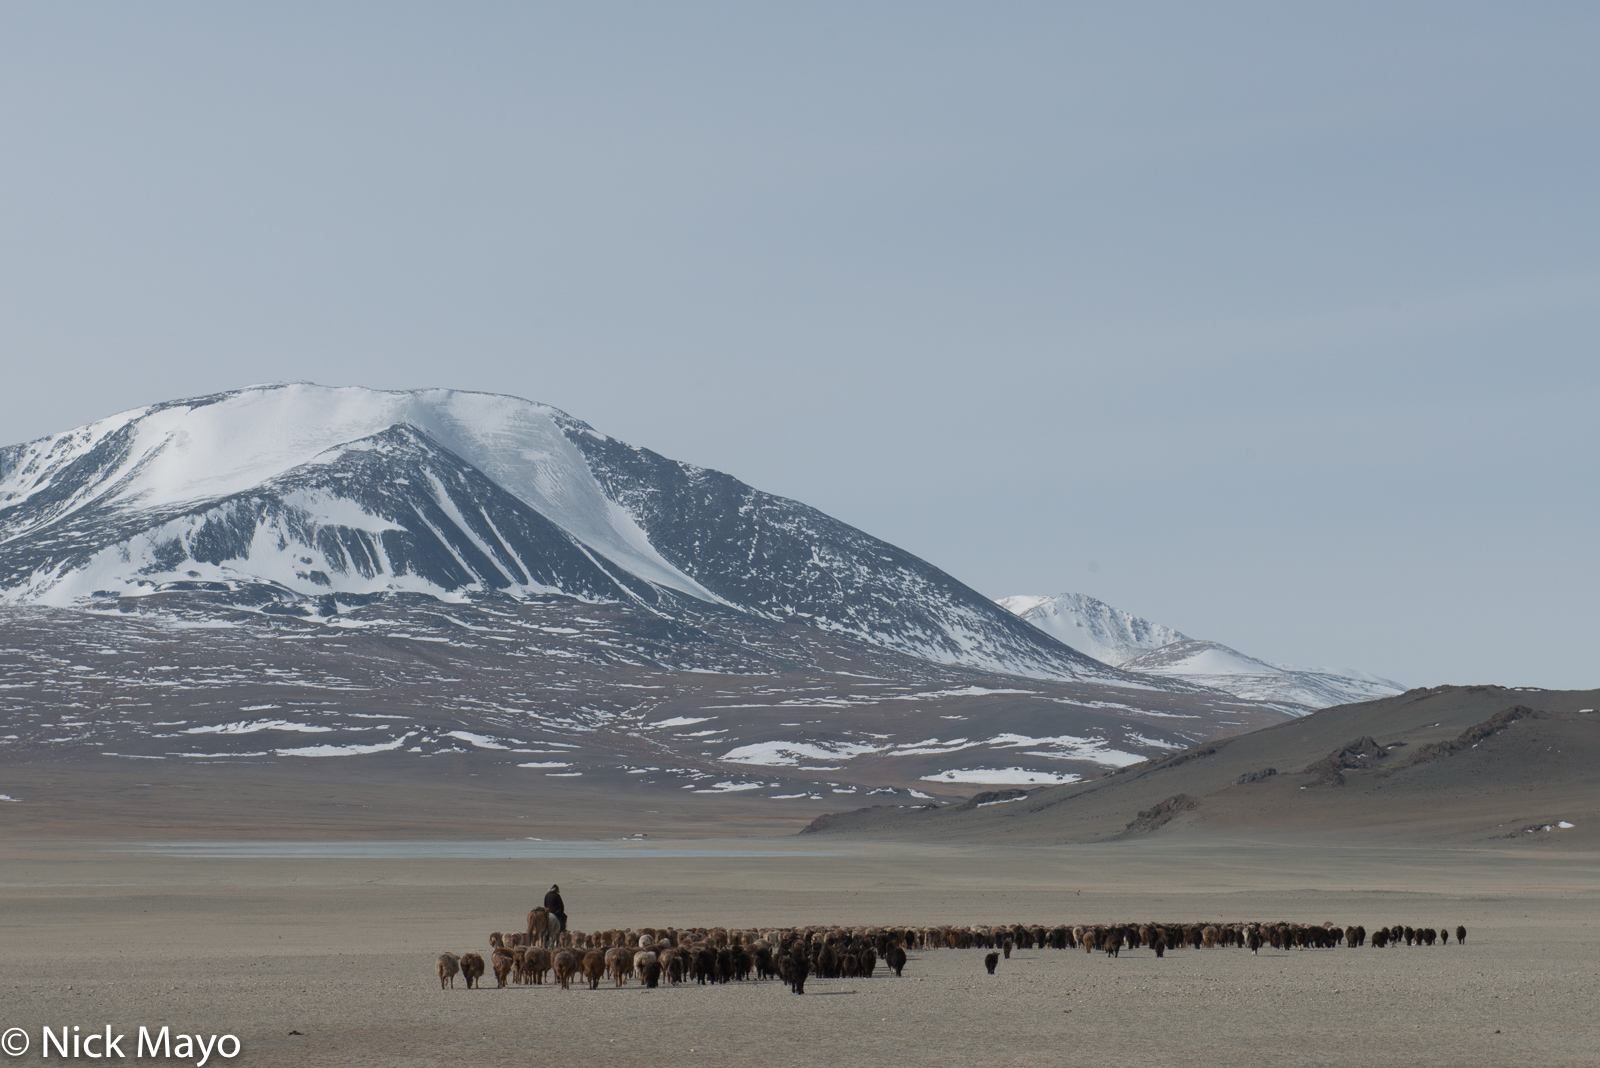 A Kazakh on horseback herding sheep and goats on the spring migration in Sagsai sum.